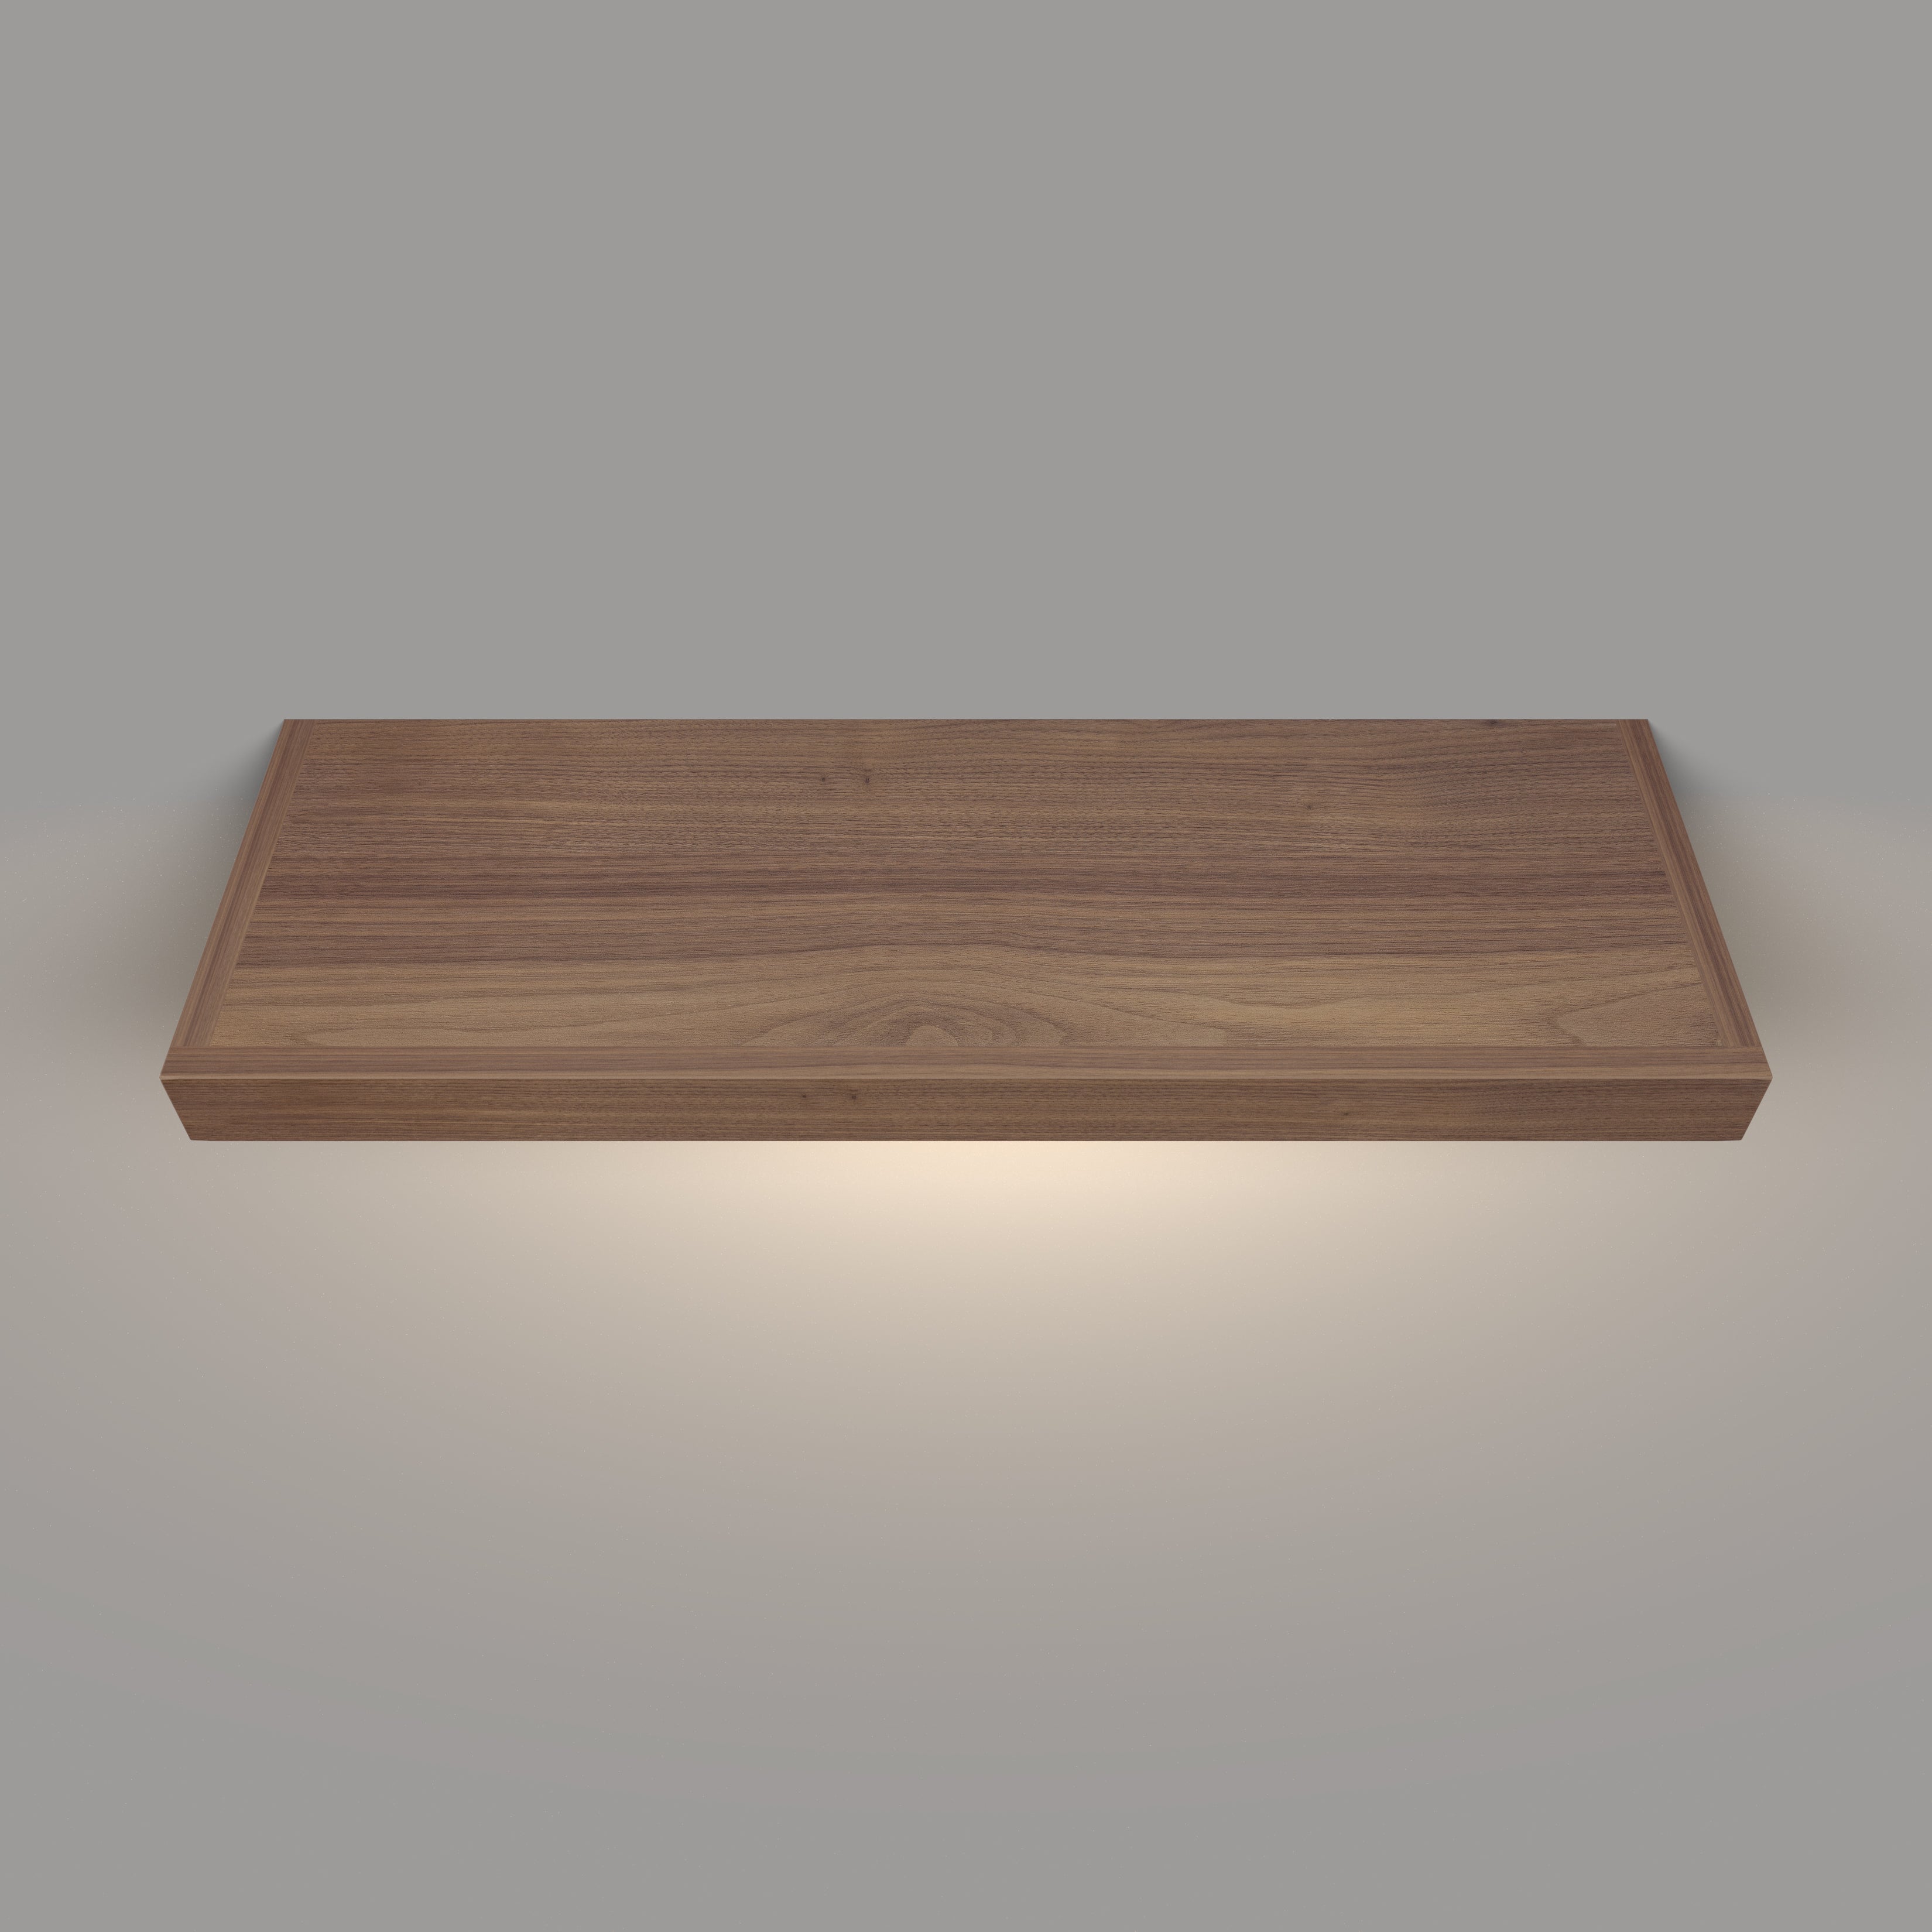 Walnut 2 Inch Thick LED Lighted Floating Shelf - Battery